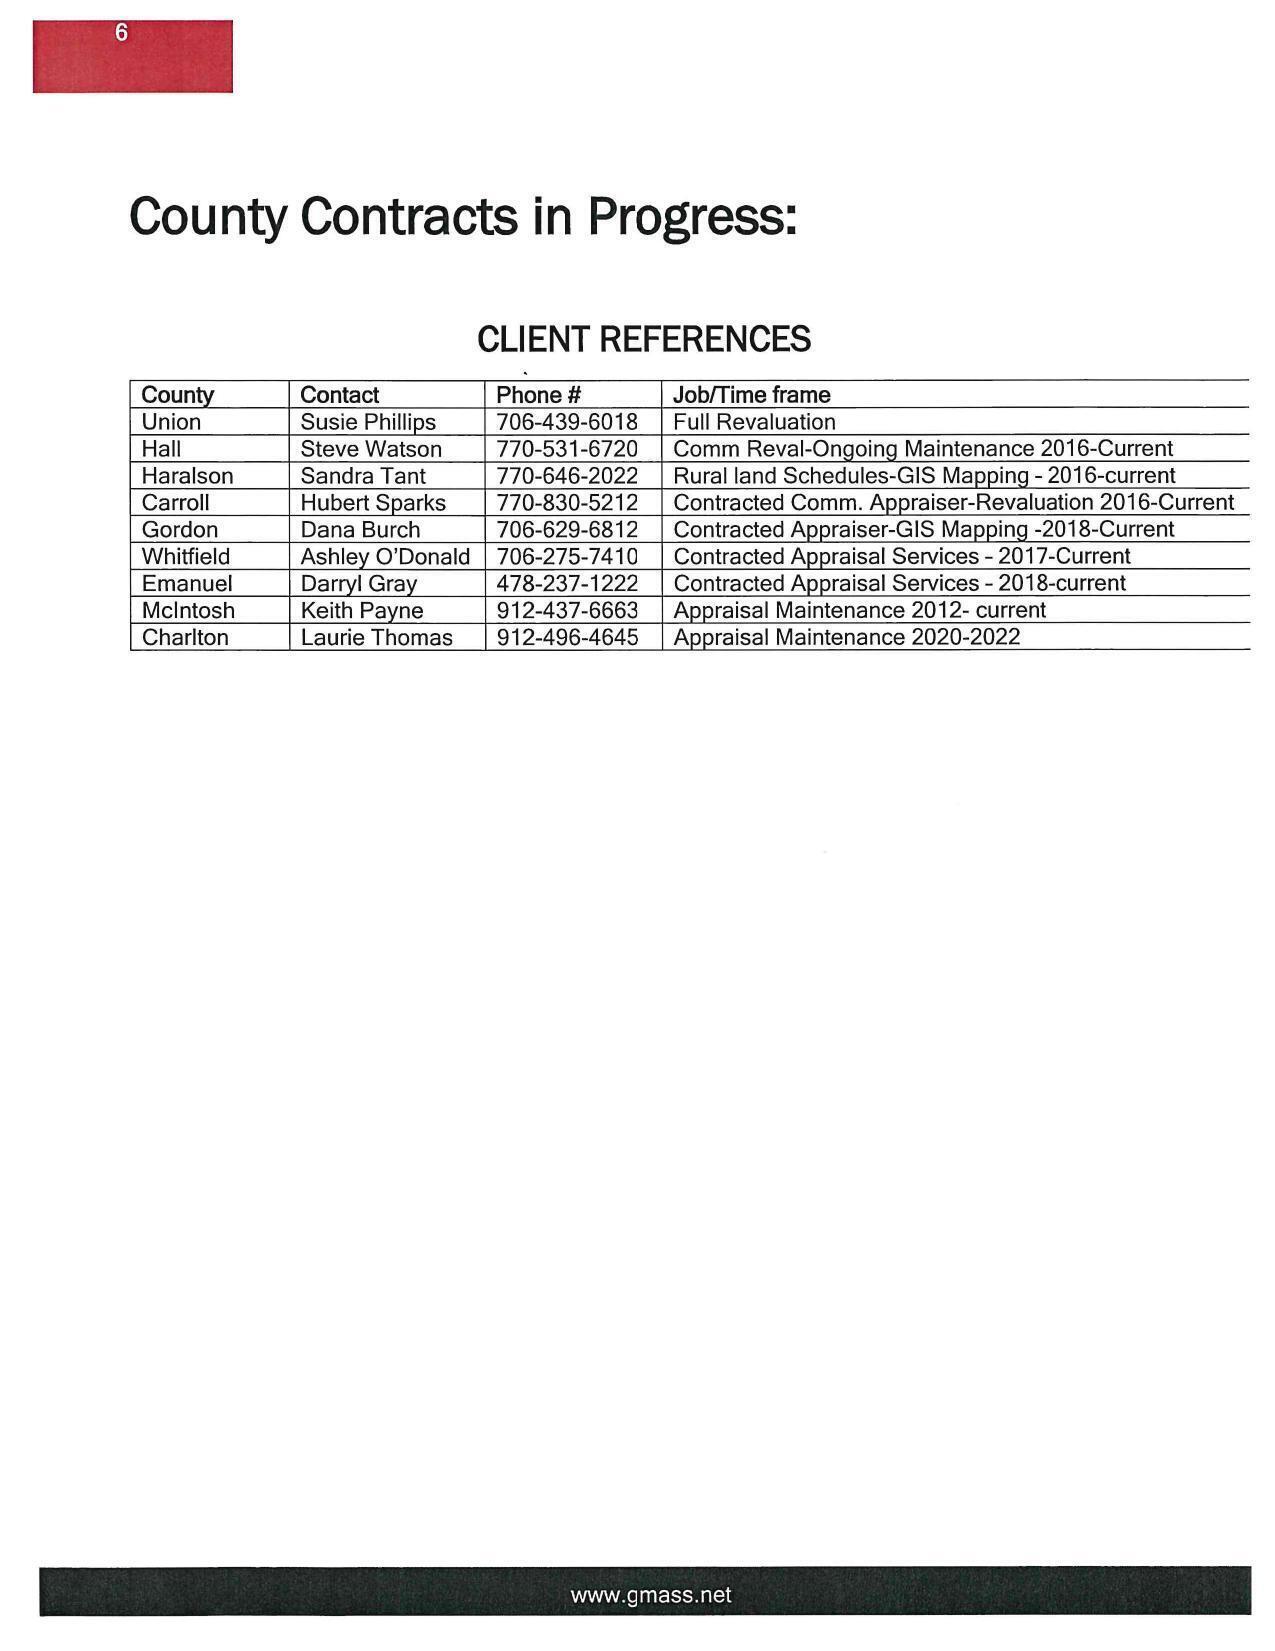 County Contrcts in Progress